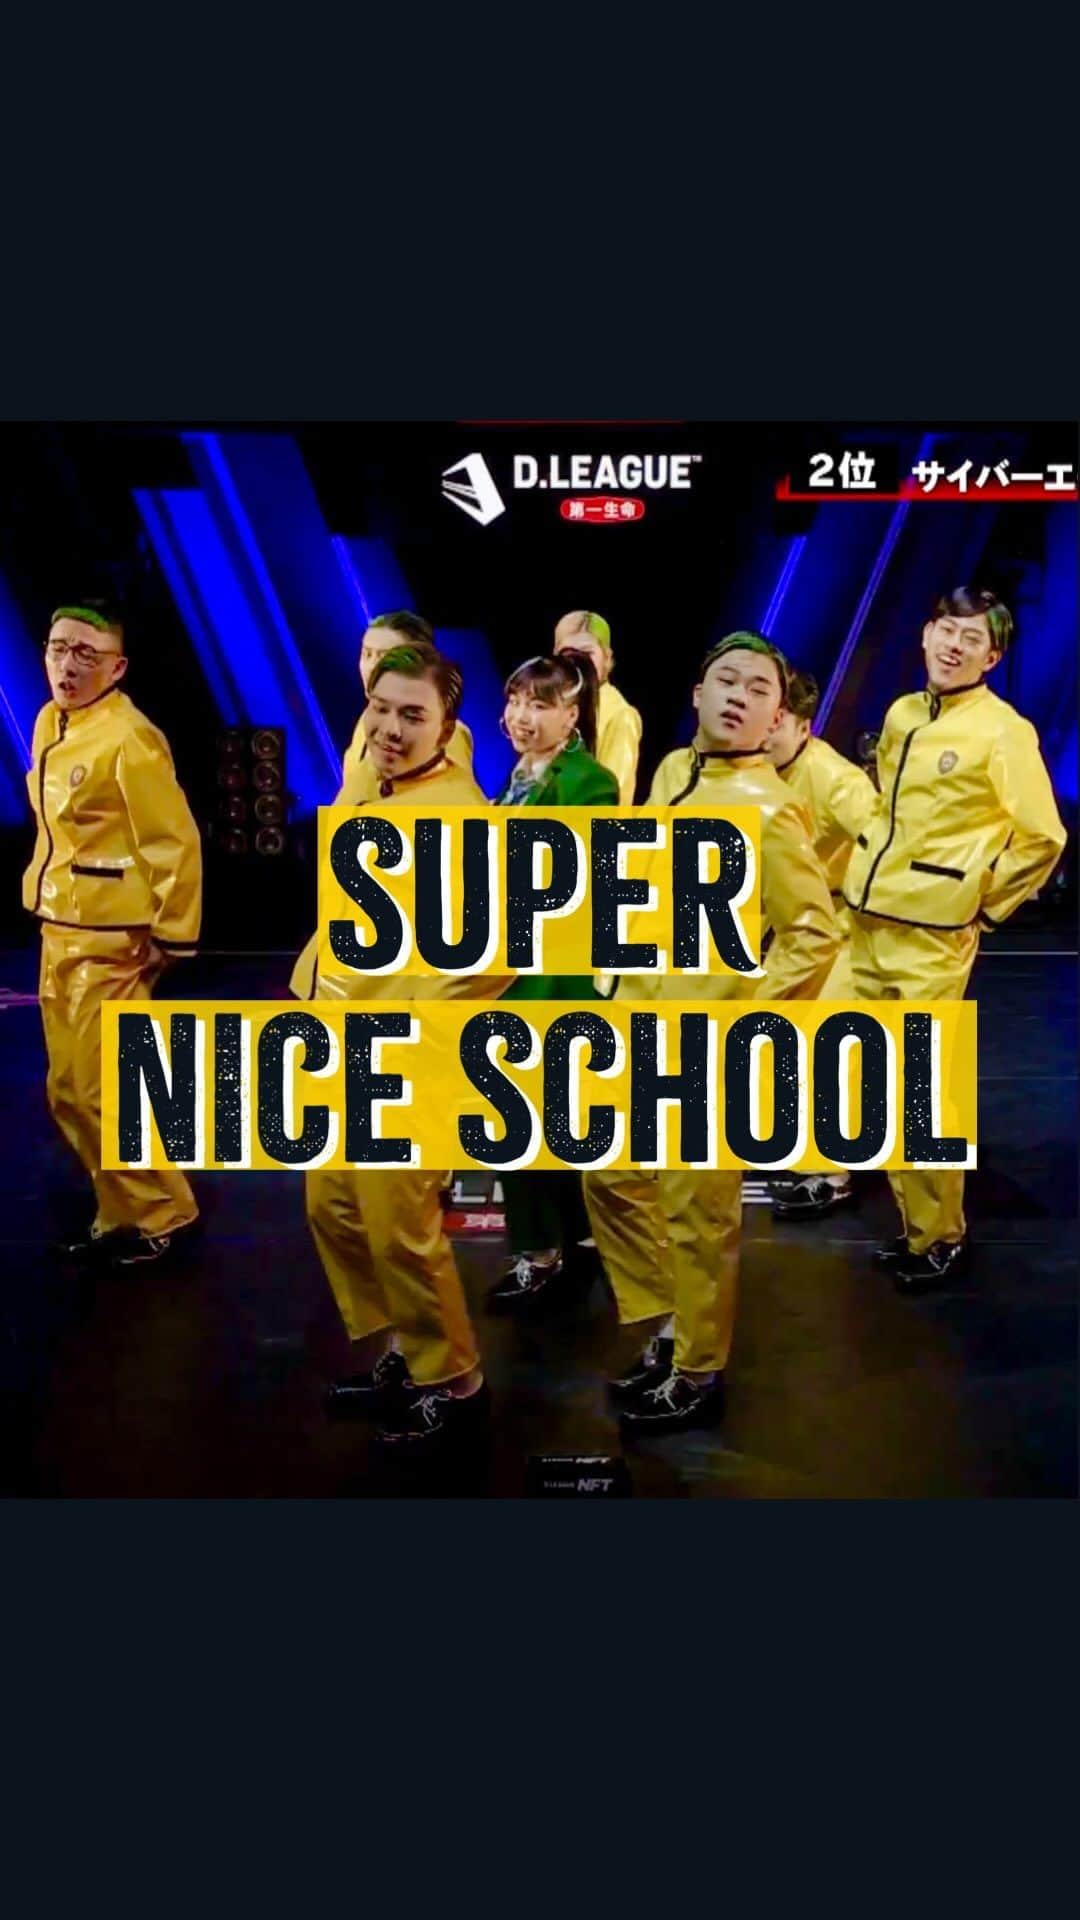 FISHBOYのインスタグラム：「“SUPER NICE SCHOOL” by @cyberagentlegit  Directed by @fishboydance  Choreo by @fishboydance @lilshowww @kai_bs.gp @ayuna_hiphop @ato_kojima @ena_lock  @beatelements_takumi   Music @kyte_xdmns  @fishboydance  Costume @mirachdesignworks   For @dleague_official 22-23 season  I have been thinking for a while "if I could be given the opportunity to create a 'school dance' that could replace the school anthem for some school. And if such a school exists, it must be an amazing school," I thought. With this imagination in mind, the production began. I hope there really is a school like that. Please take a look at the full video through the link in my profile.  校歌に替わるような”学校のダンス”をどこかの学校に作らせてもらえないものだろうか。と以前から考えていました。 そんな学校があったとしたら、その学校はとても素敵な学校に違いない。という想像から制作が始まりました。 校歌にもダンスが存在し、気をつけはオリジナルスタイル、前ならえはせず向き合って握手といった個性を大事にする校風がベースとなりました。 世界の未来は俺たちが変えるんだ！と日々努力する学生たち。そしてパワフルな校長。そんな人物像が設定に盛り込まれ振付や楽曲を構成していきました。それぞれのキャラクターが良い感じに出ていてメンバー一人一人を観るために何周もしてしまいます。メンバーの皆ありがとう。 本当にこんな学校あったらいいなぁ。全編はプロフィールからどうぞ！  #dance #schooldance #schoolanthem」